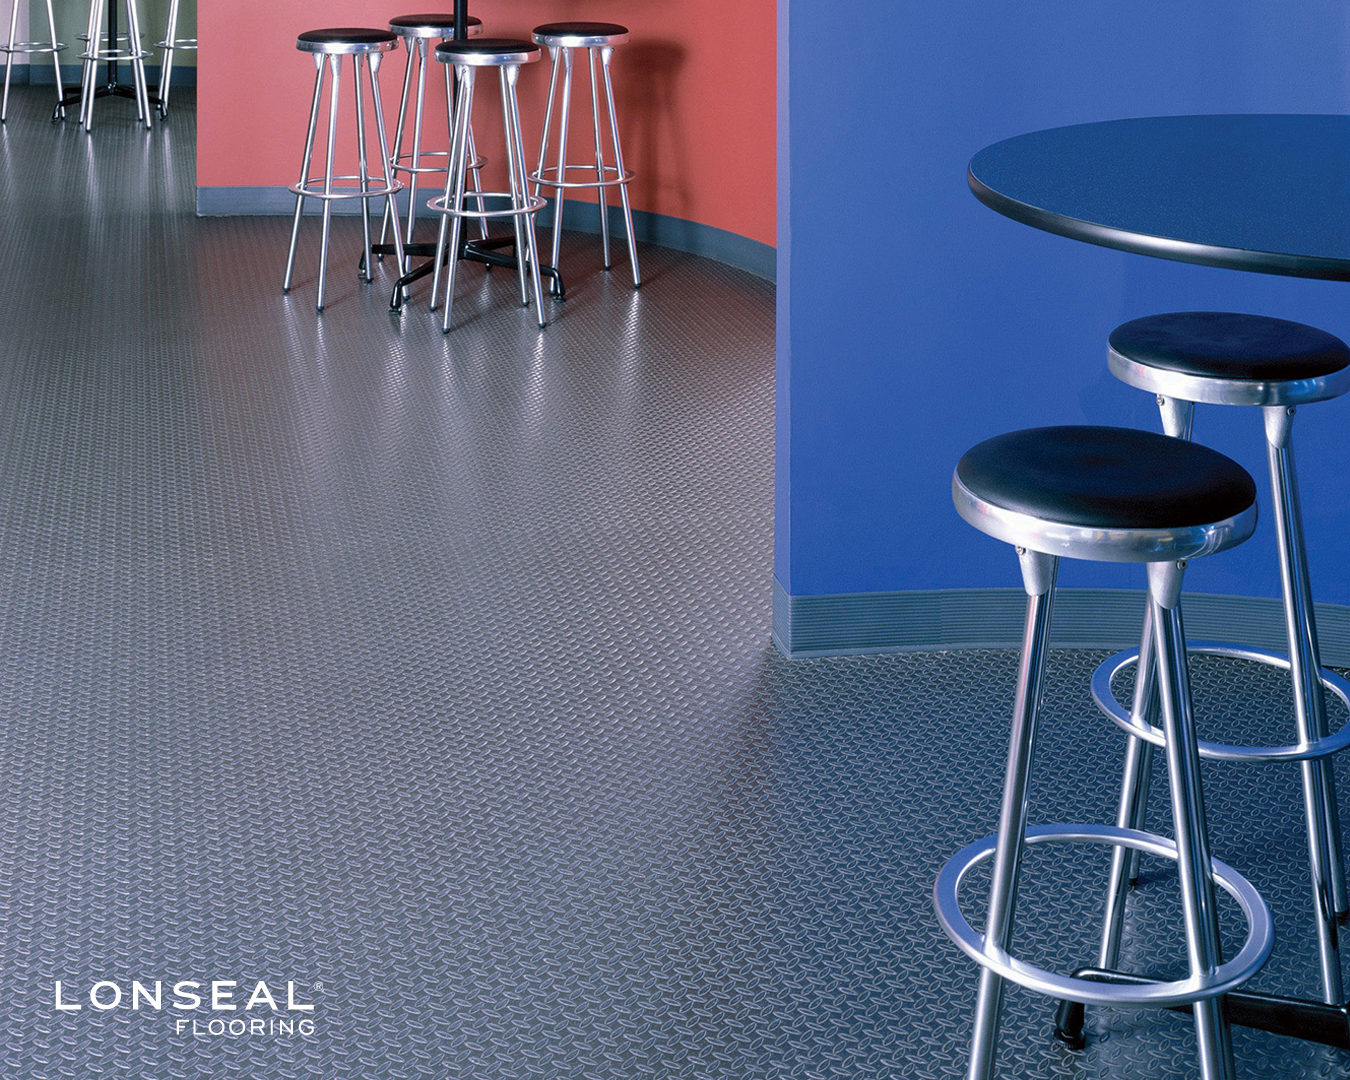 Lonseal, Sheet Vinyl Flooring, LONPLATE® PATINA is a resilient sheet vinyl surface with high-tech metallic coloring and a